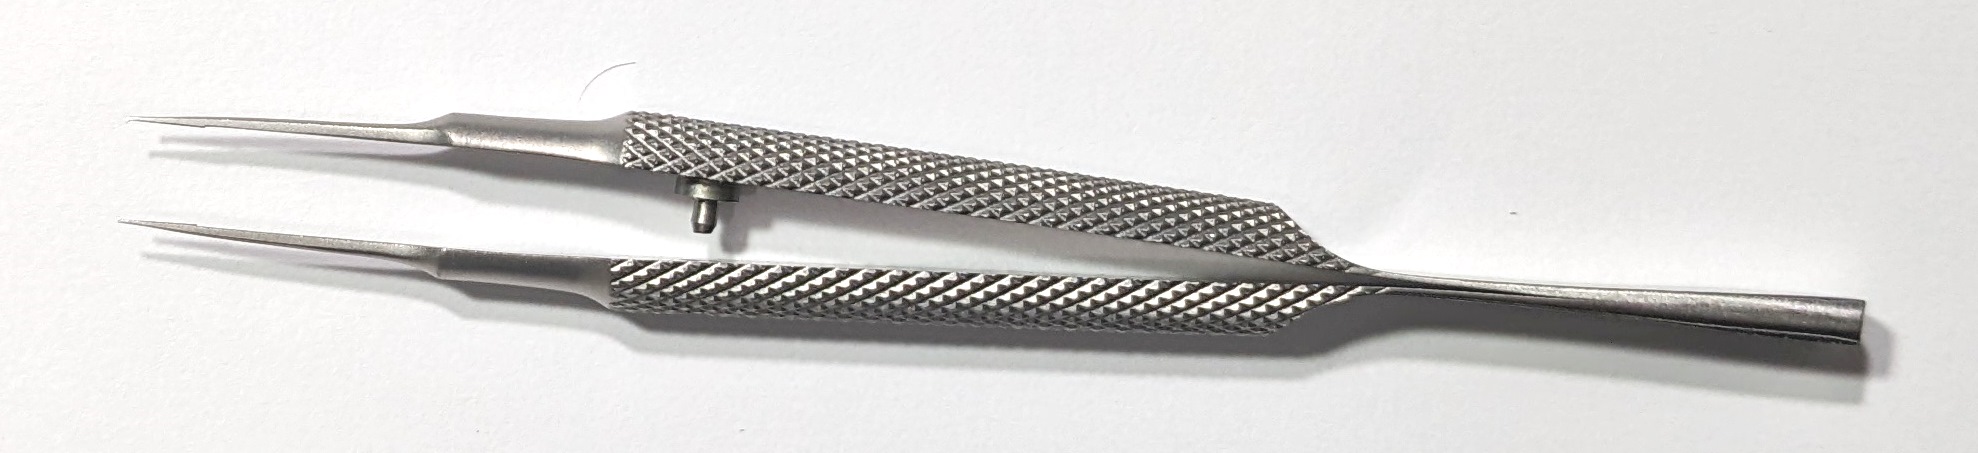 Micro suturing forceps with 0.20mm straight tips and teeth